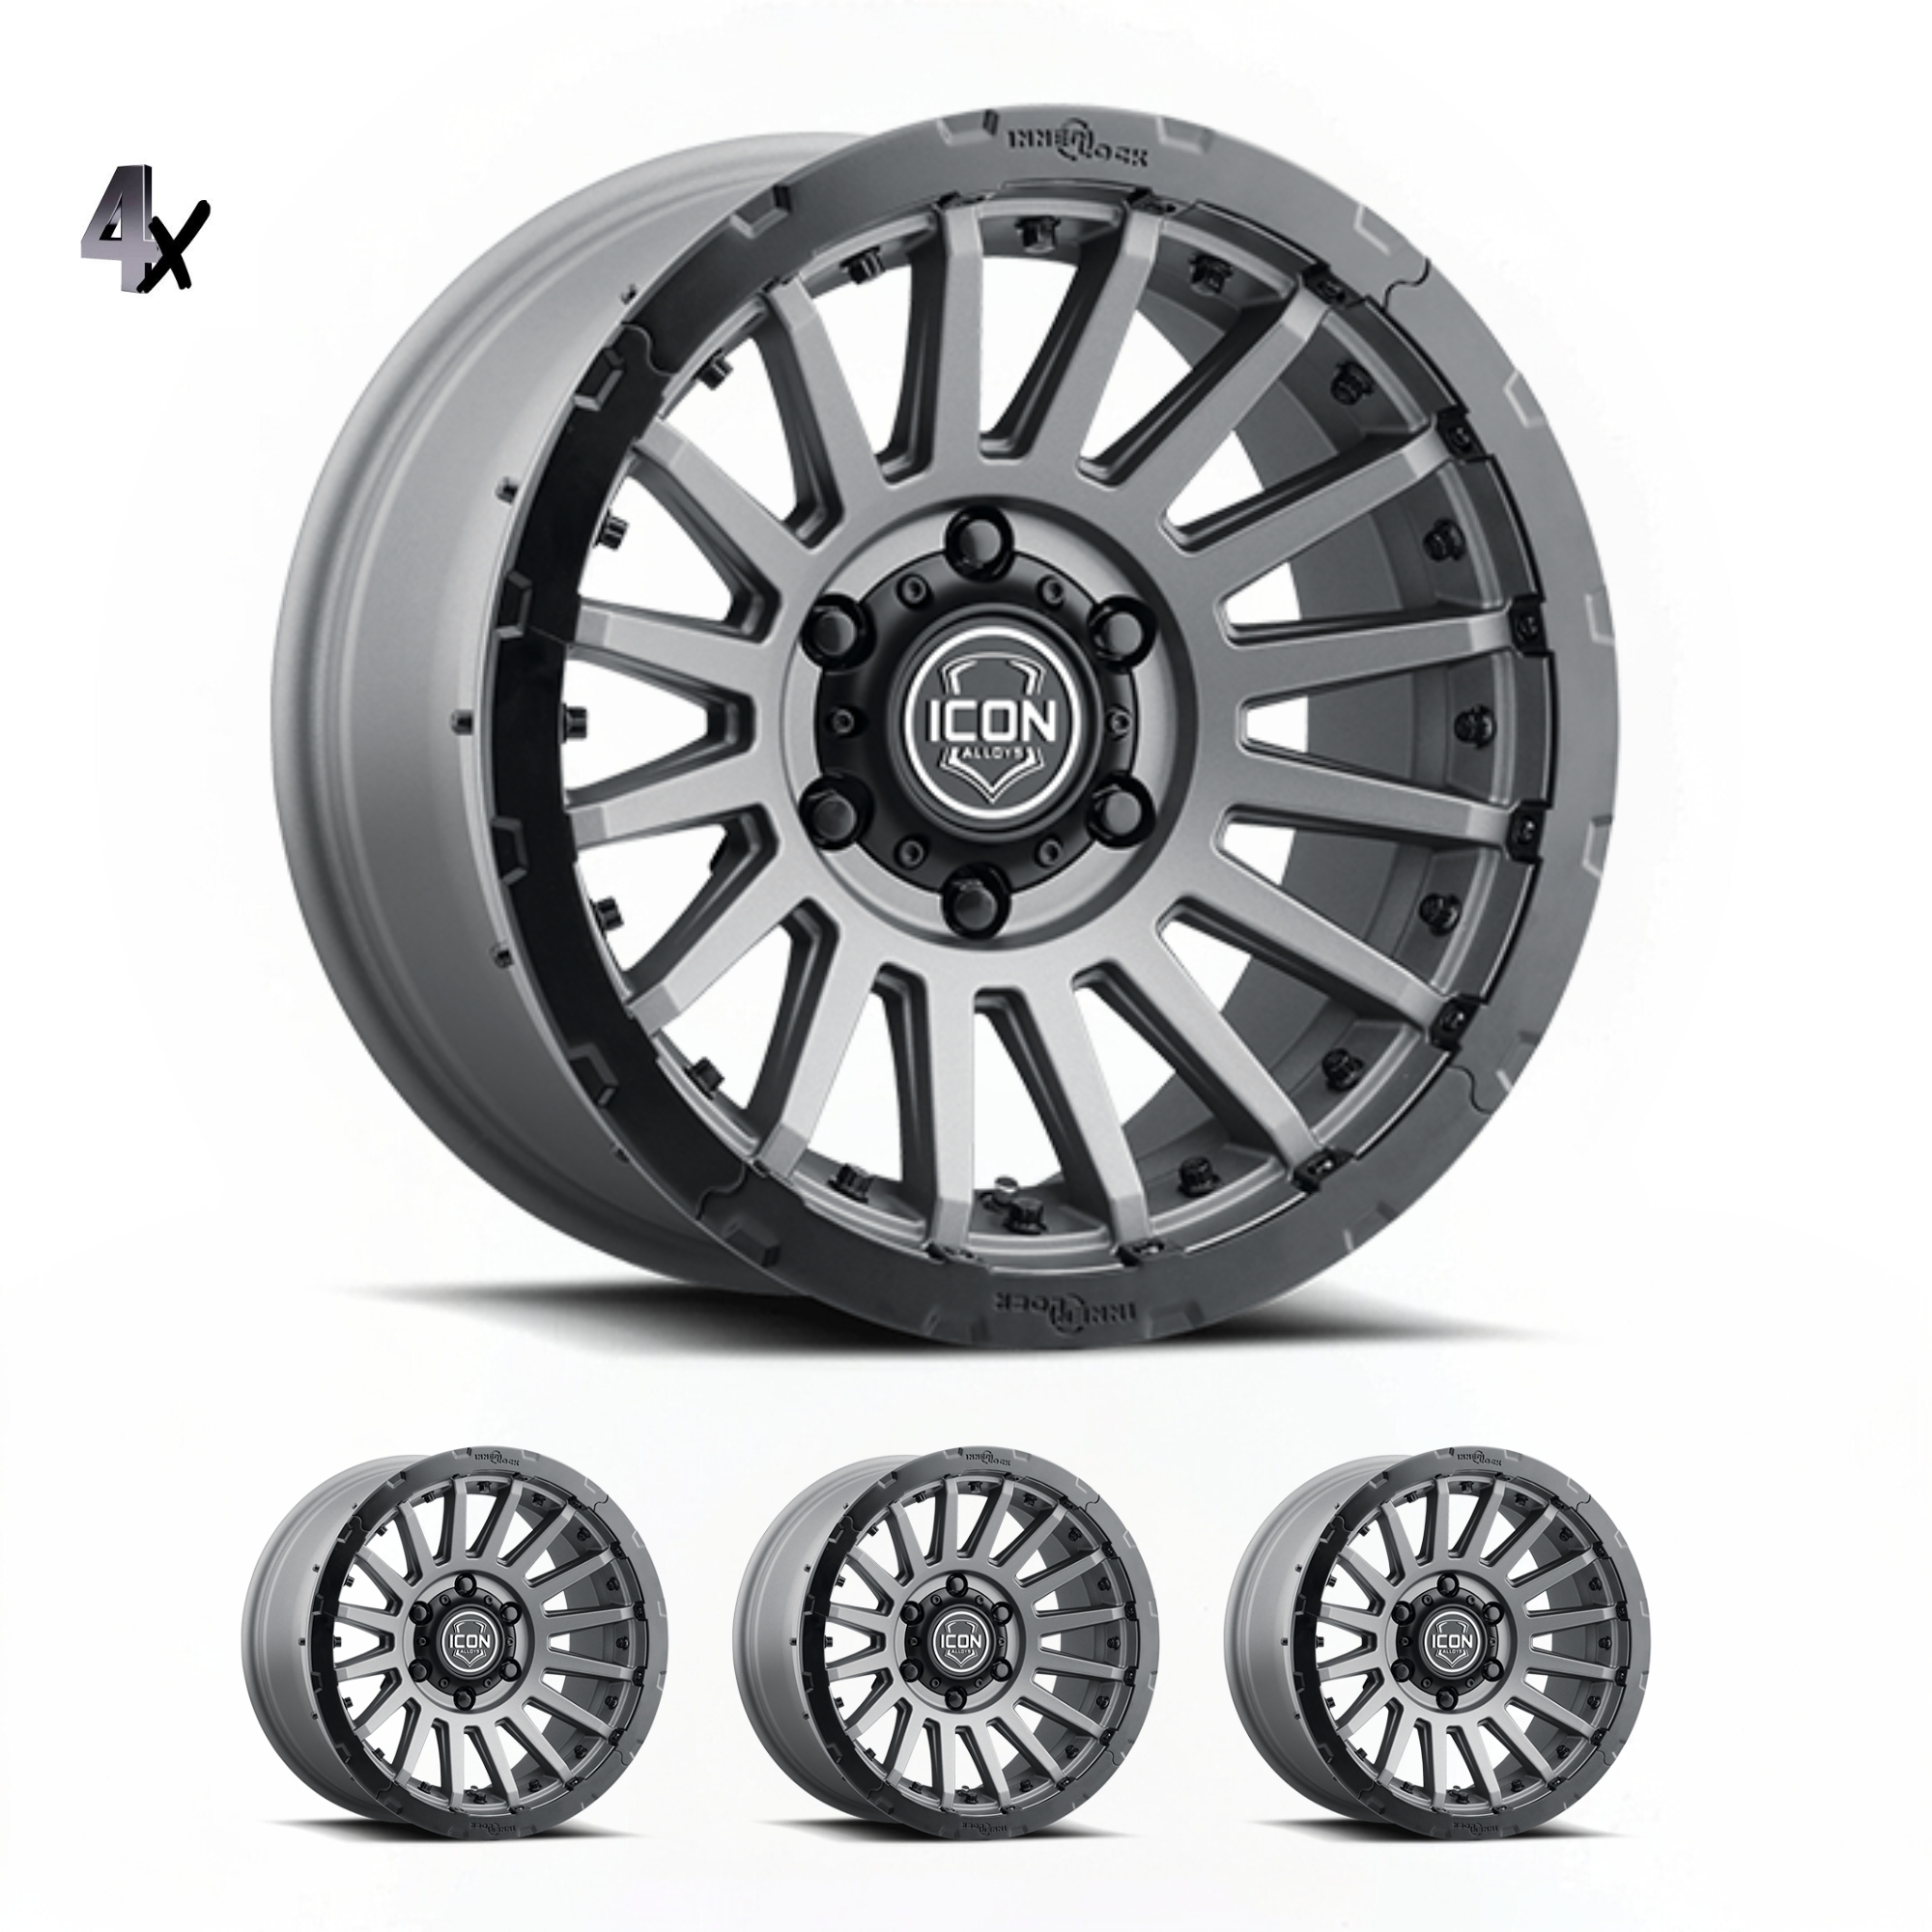 LC200 (17×8.5) 4x RECON PRO CHARCOAL 5×150 +25 OFFSET